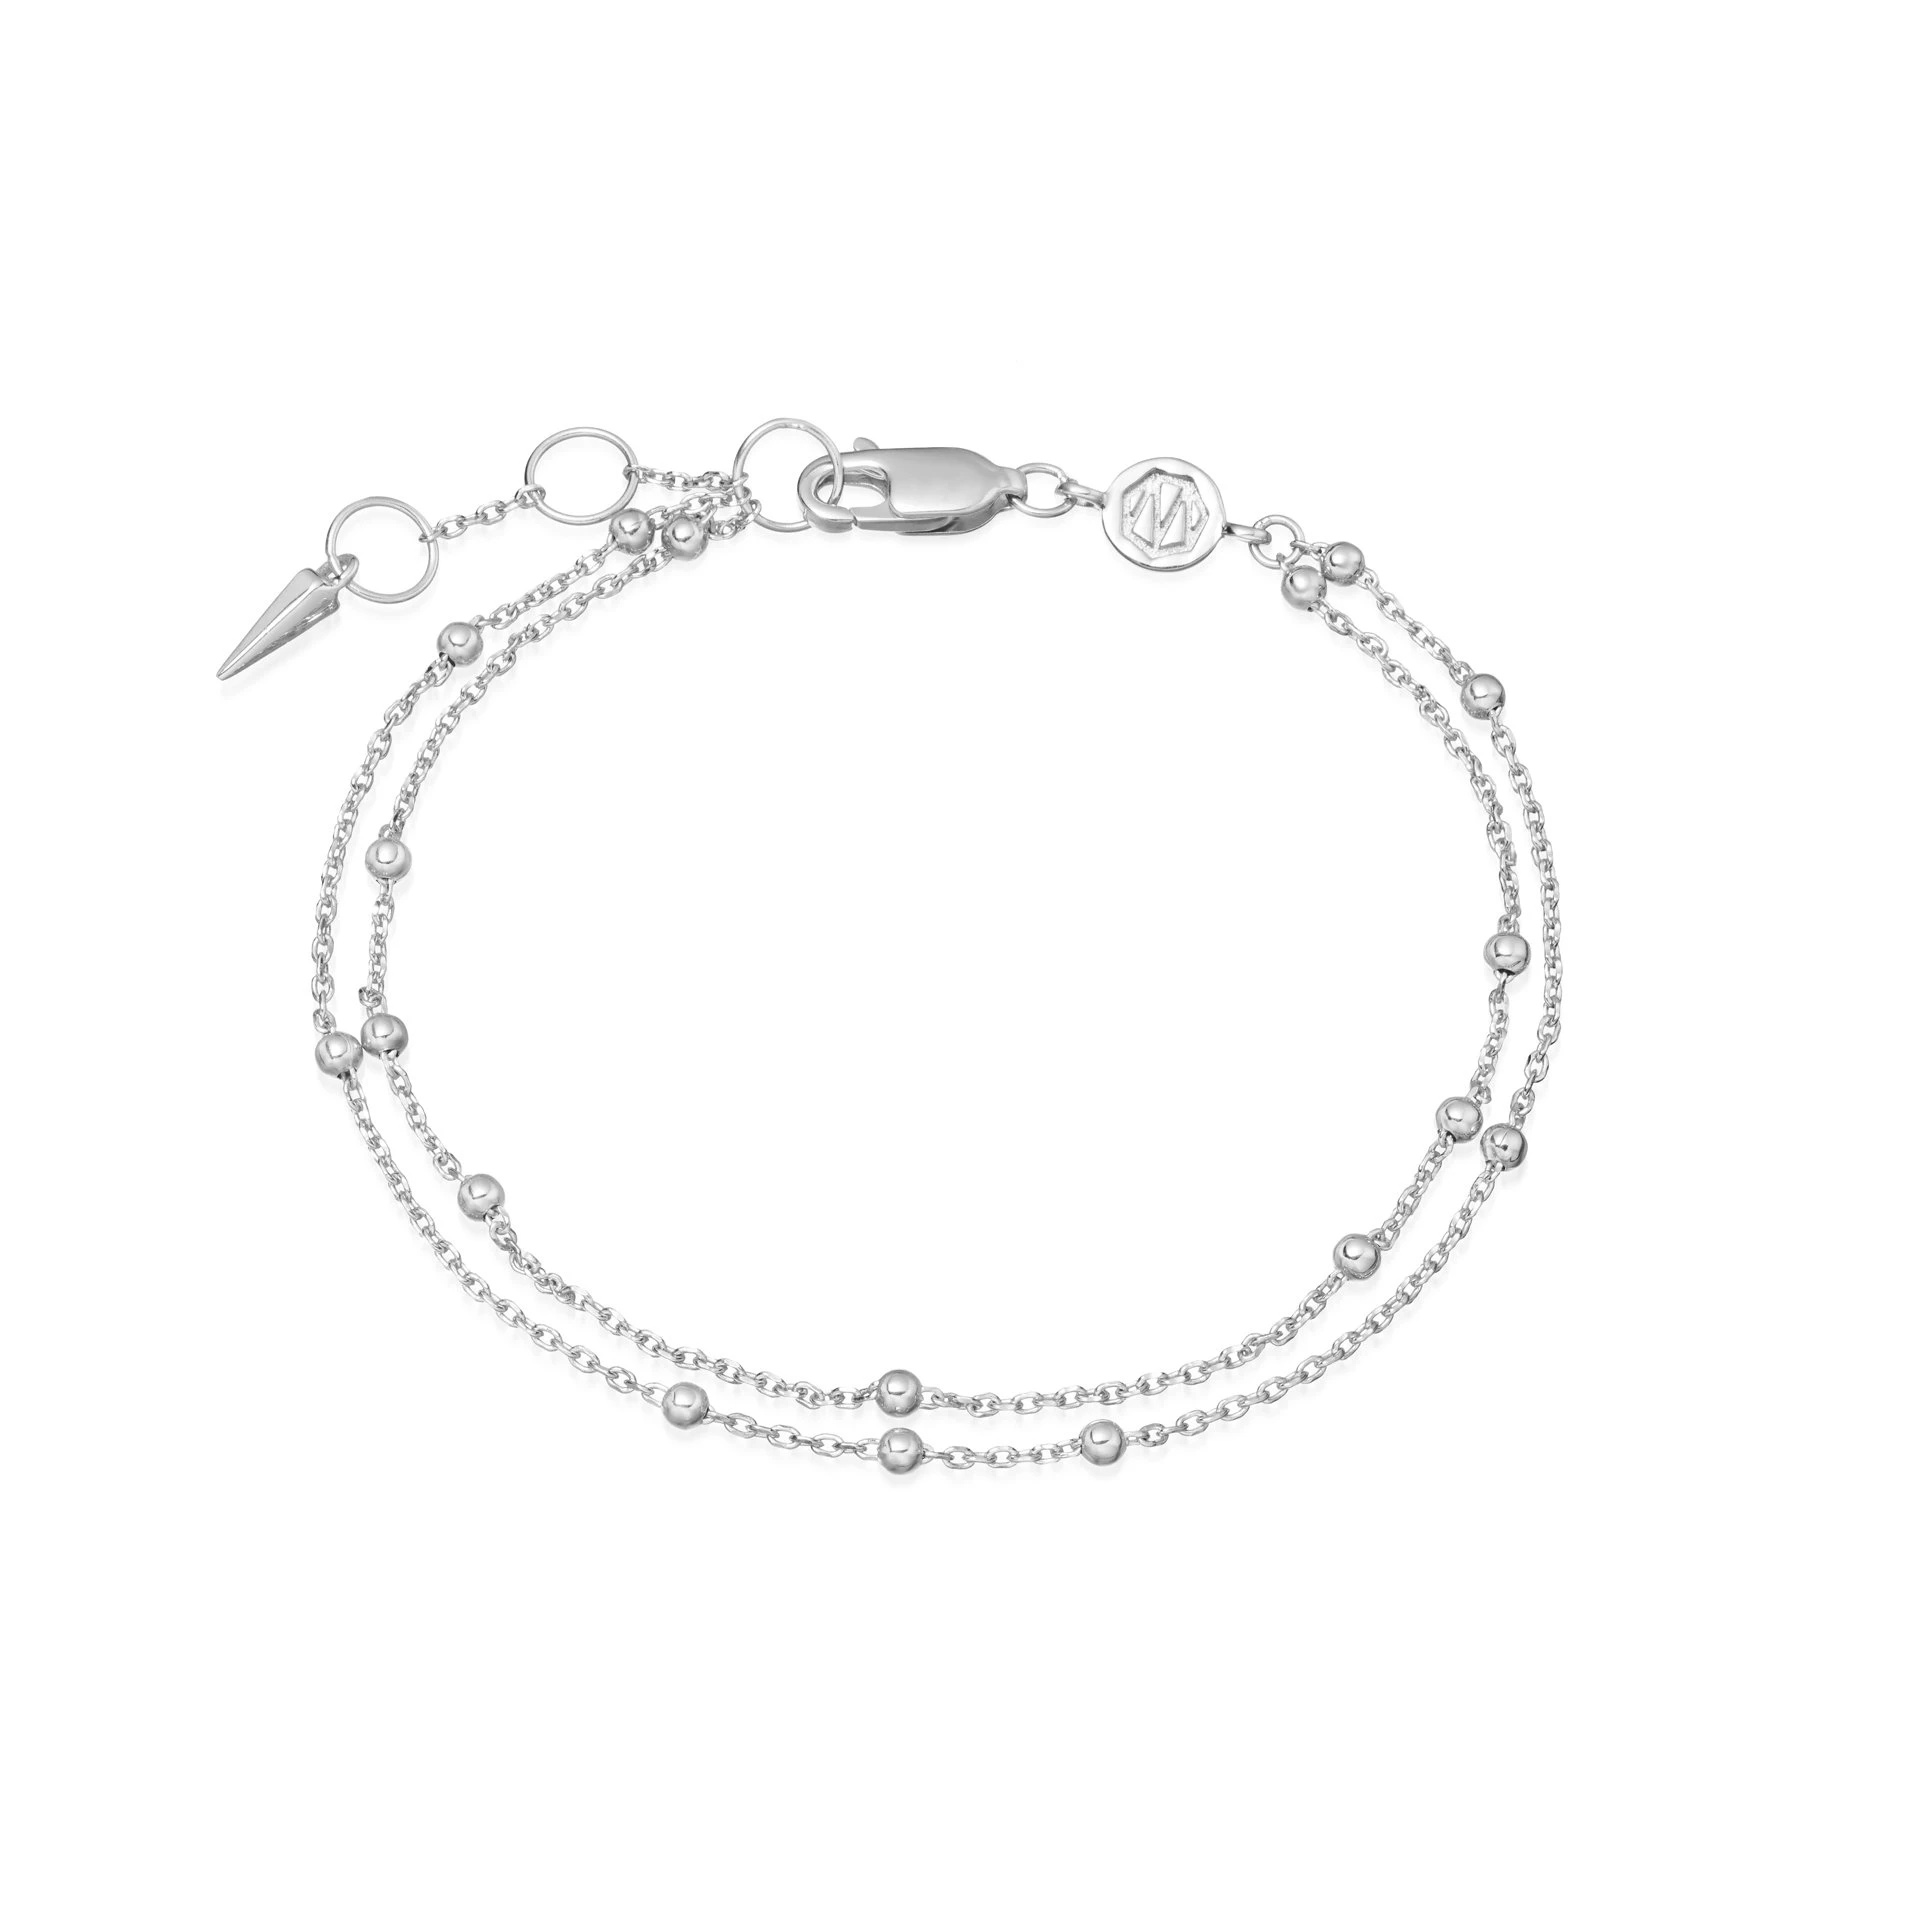 Wholesale Design OEM silver double chain bracelet OEM/ODM Jewelry for a more statement look